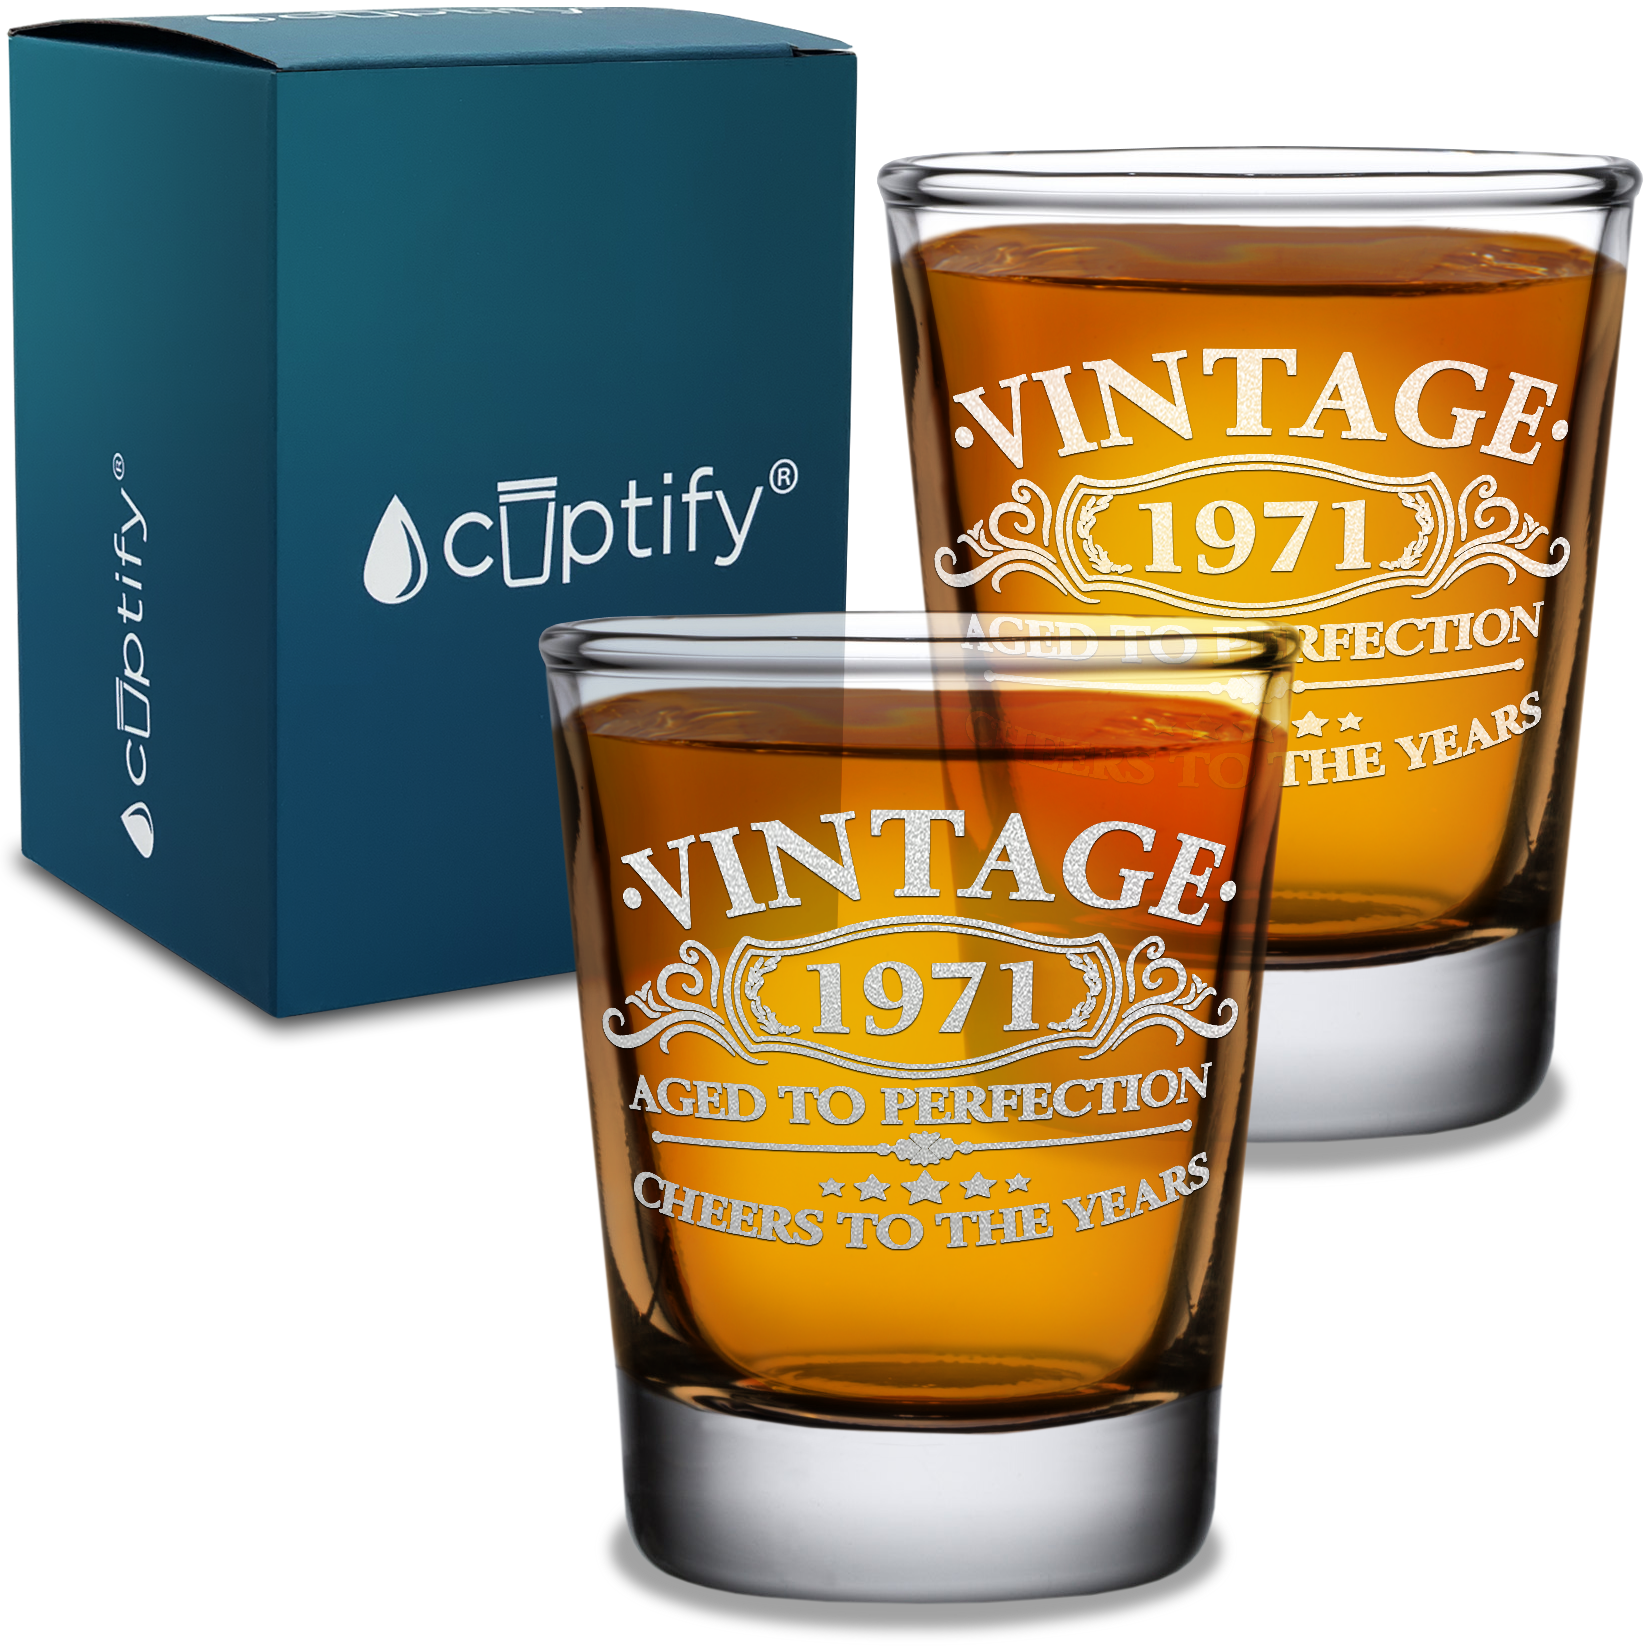 Vintage Aged To Perfection Cheers To 50 Years 1971 Laser Engraved on 2oz Shot Glasses - Set of 2